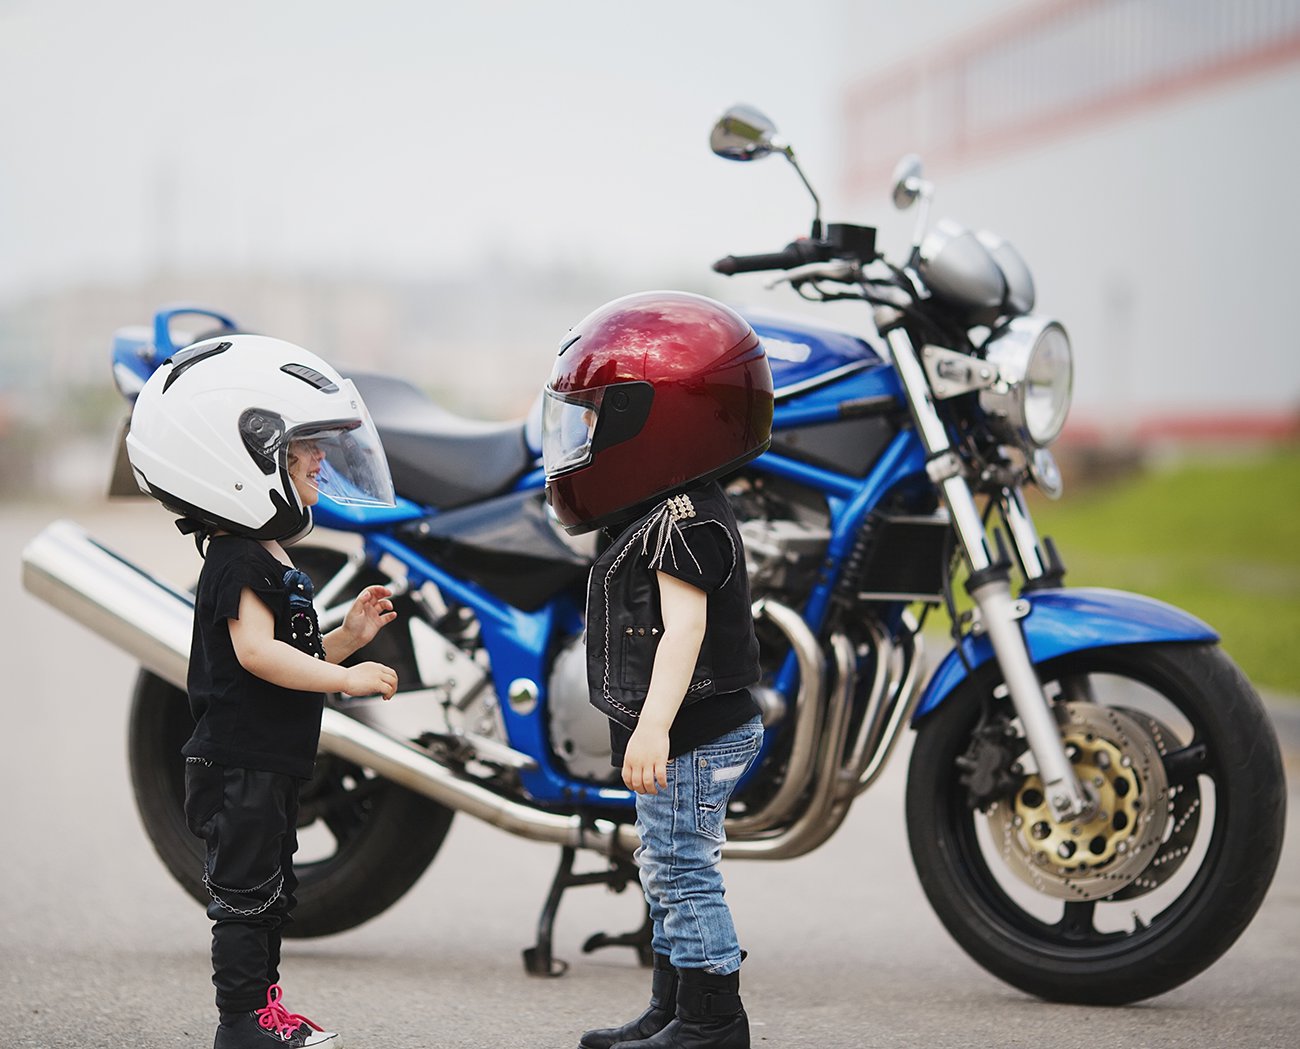 Motorcycle Insurance - Preferred Insurance Services